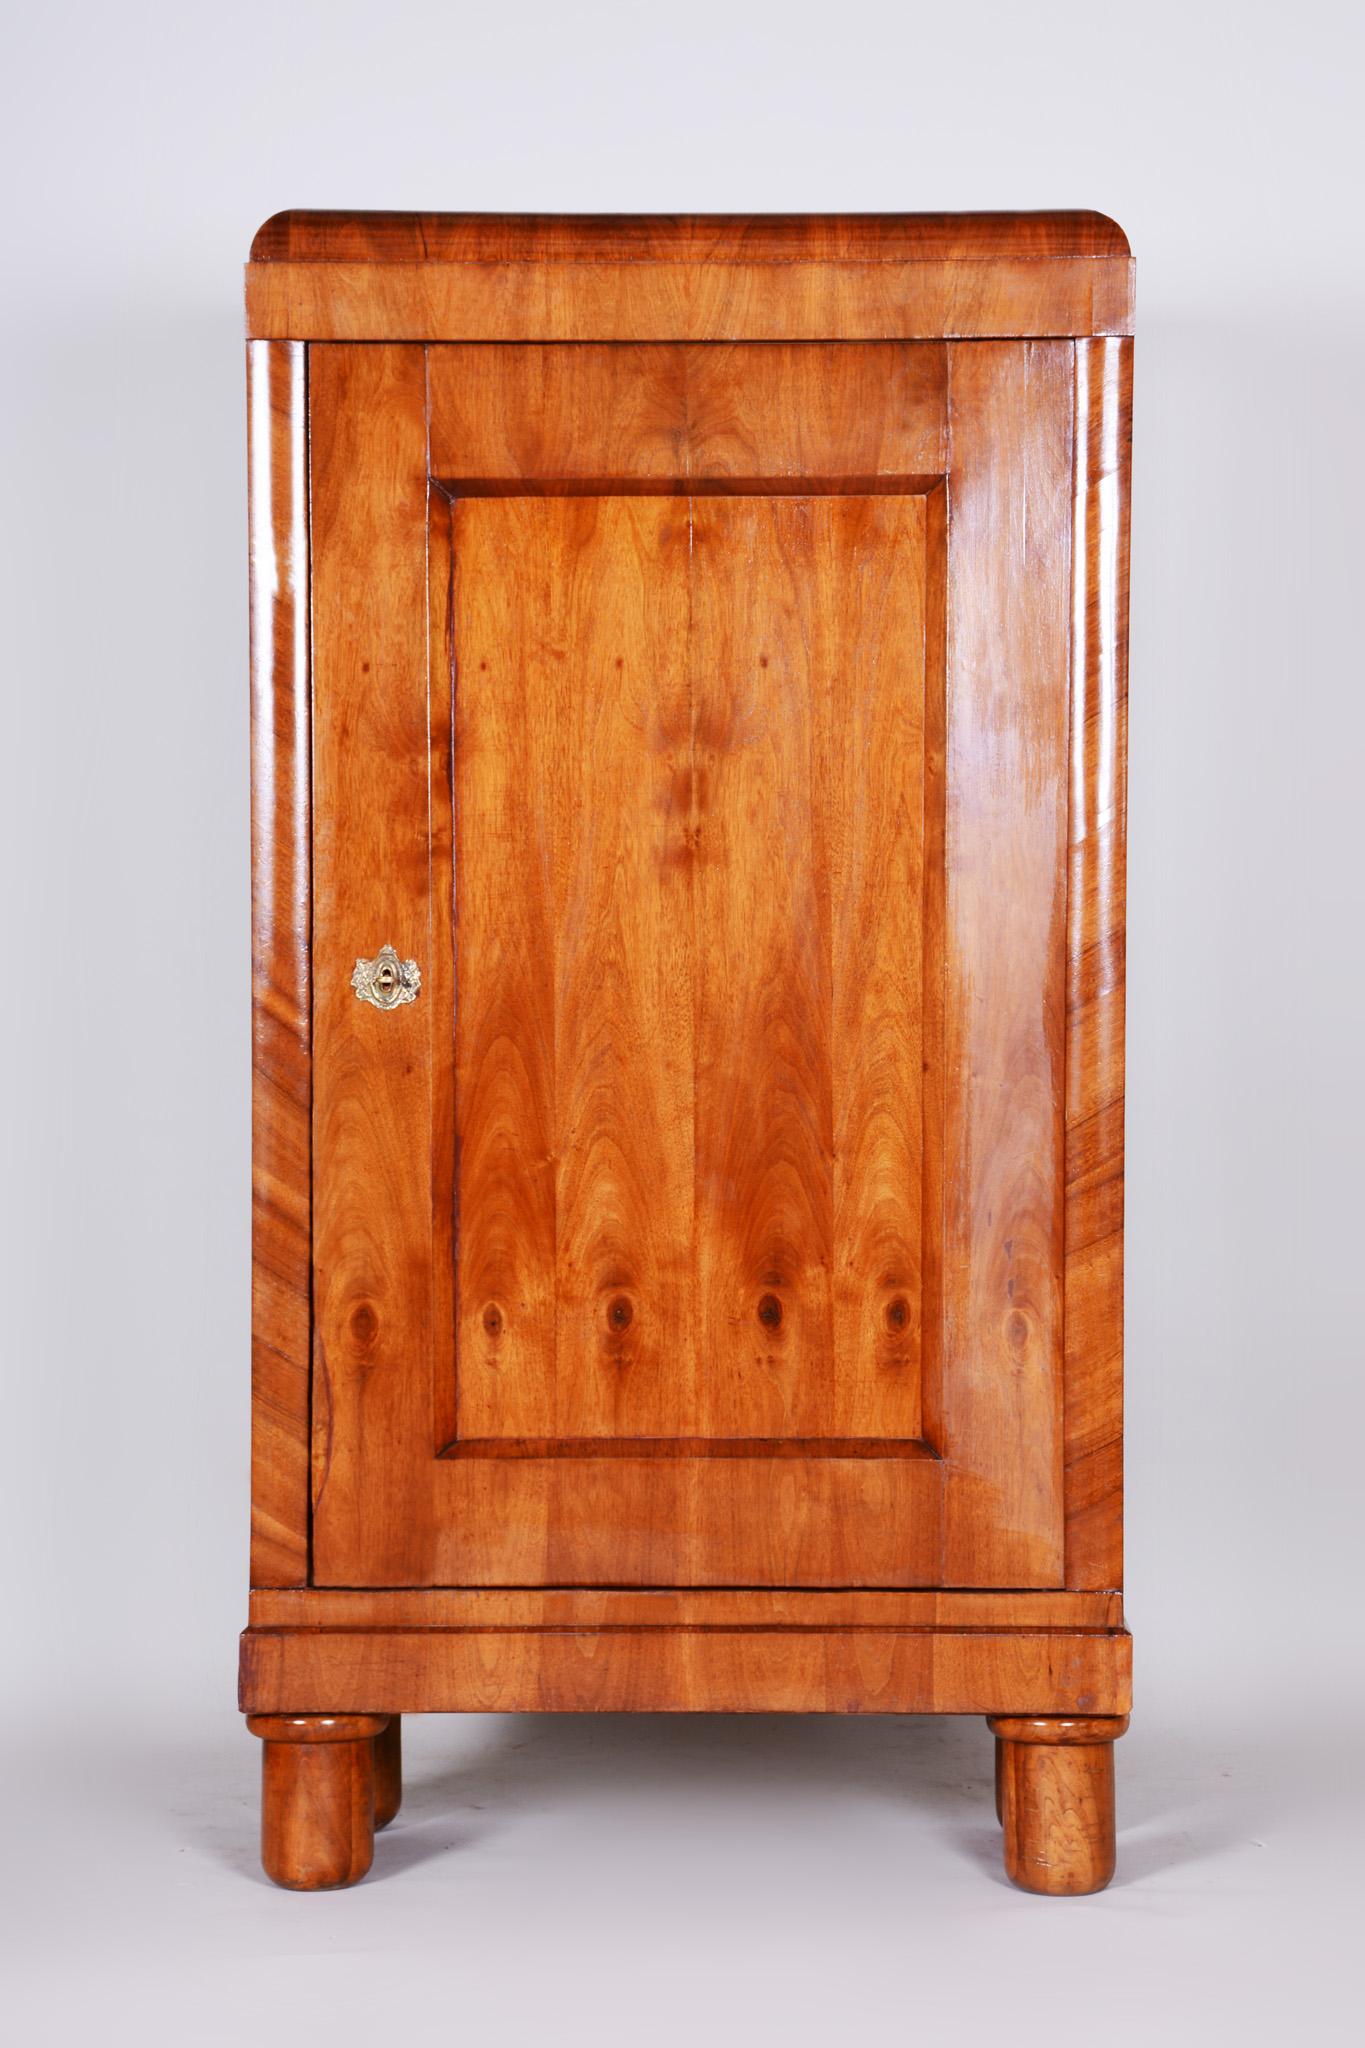 Shipping to any US port only for $290 USD

Completely restored Czech one door Biedermeier wardrobe cabinet.
Source: Bohemia (Czechia)
Period: 1830-1839
Material: Walnut

Completely professionally restored.
The original revived polish.